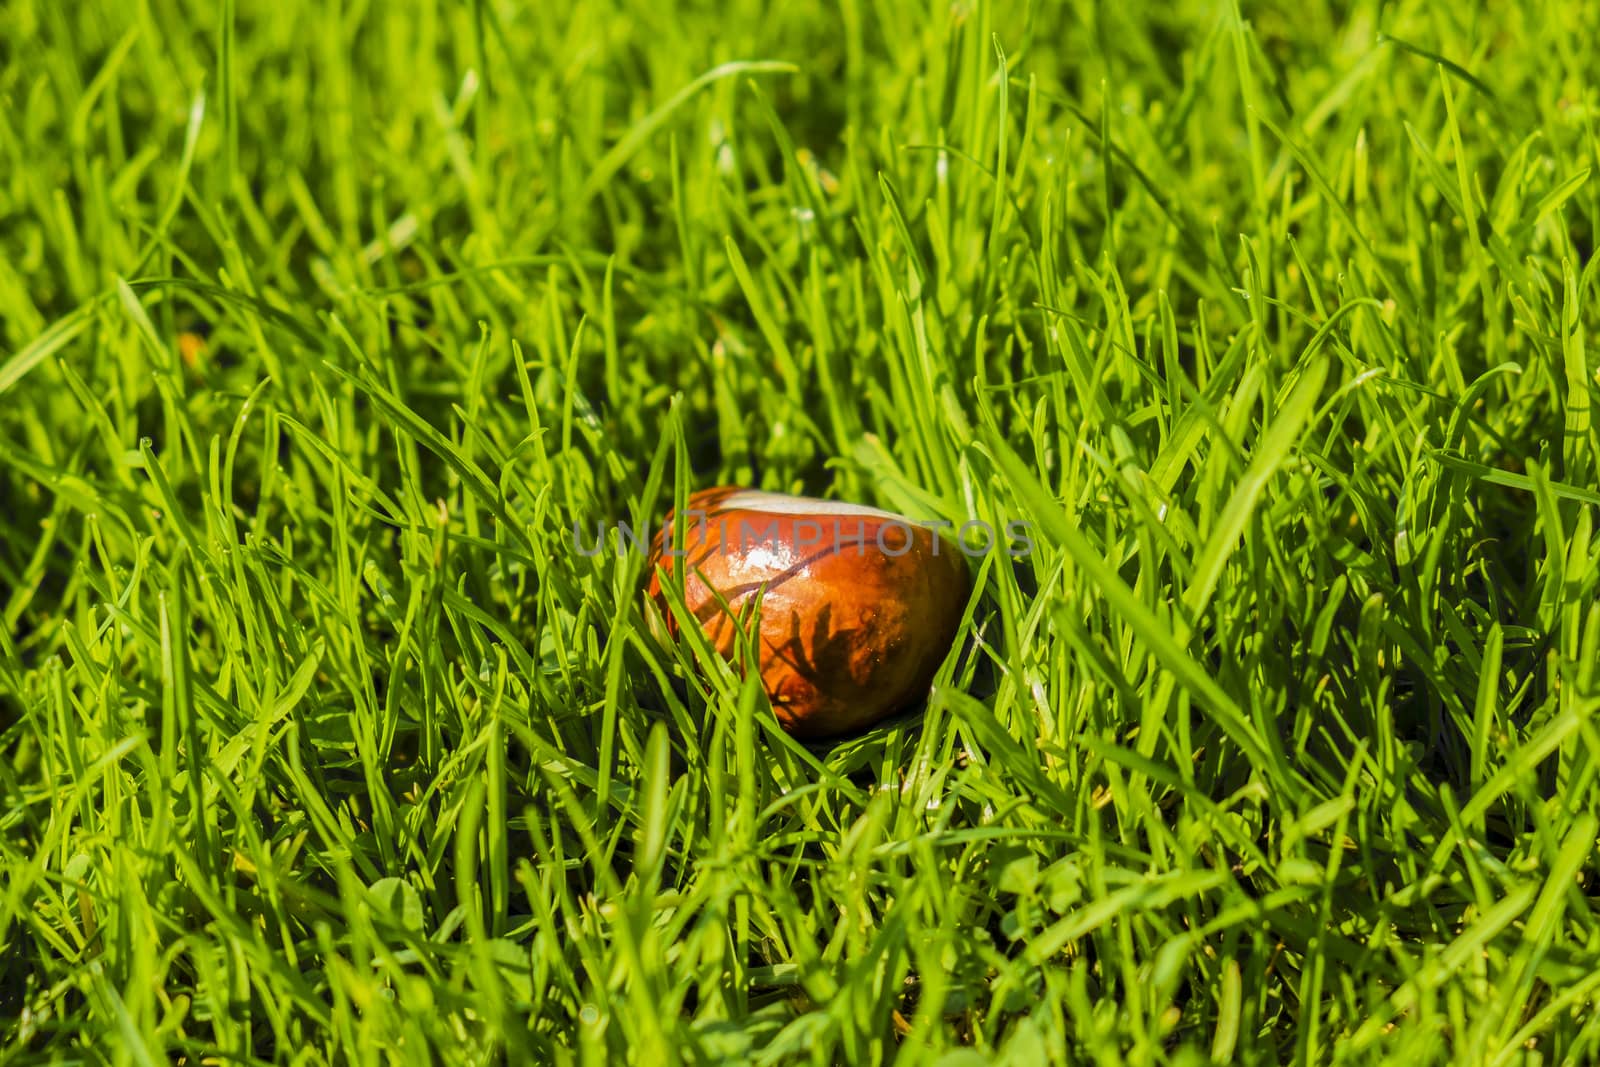 horse chestnut seed lying in green grass